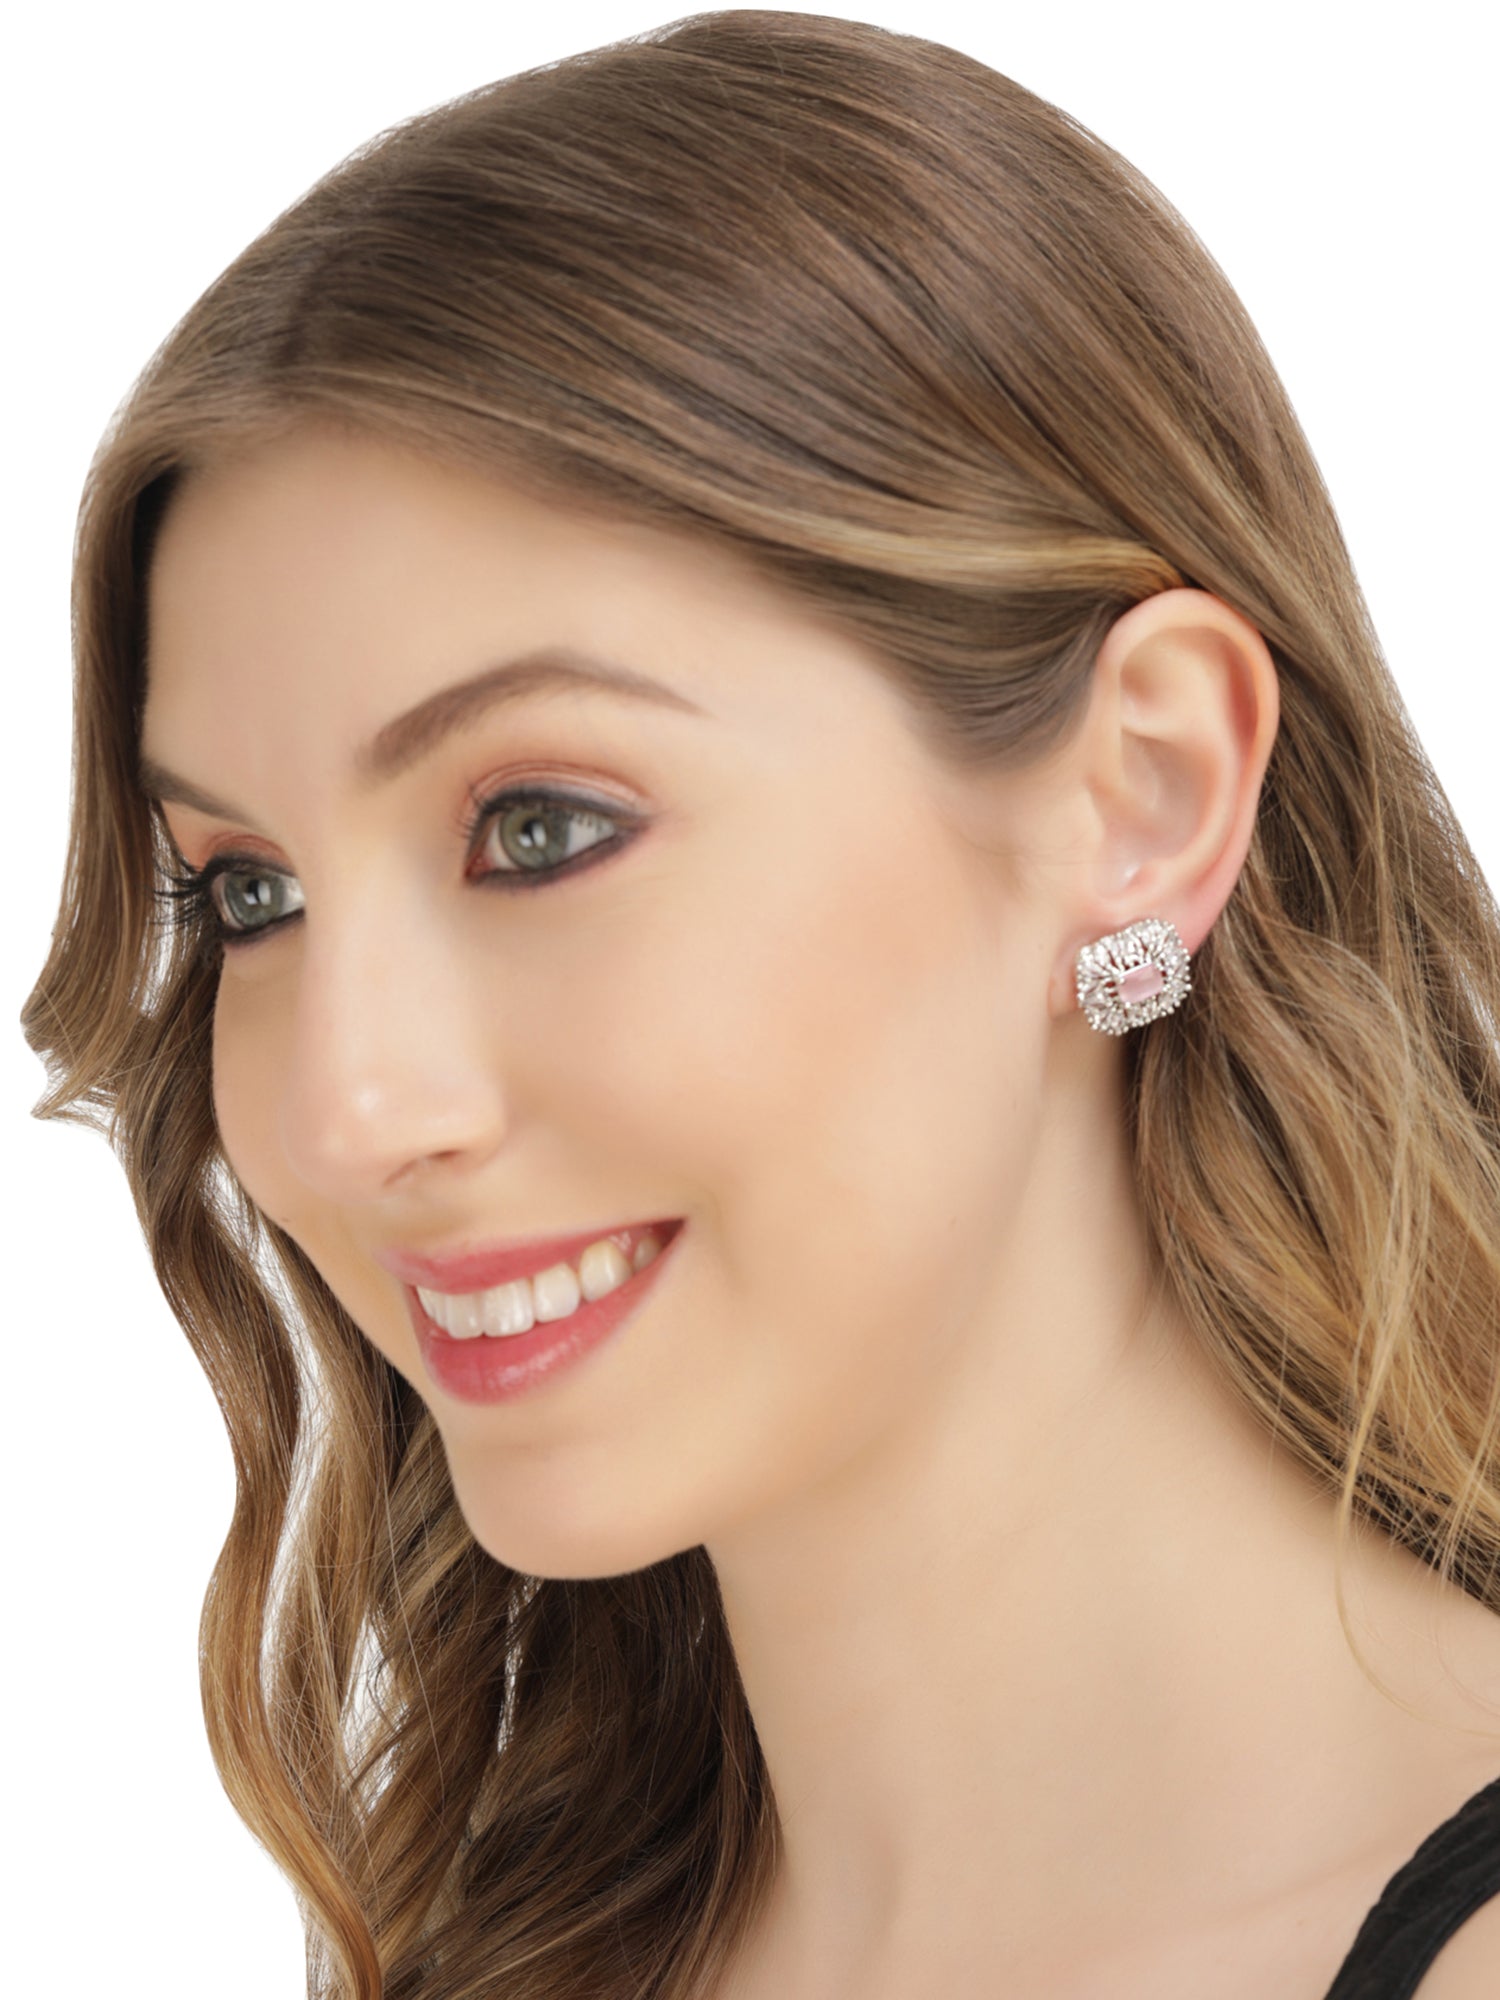 Mekkna Women's Stone Stud Earrings . High-quality materials and elegant stone detailing make these earrings a must-have for any fashion-forward woman.